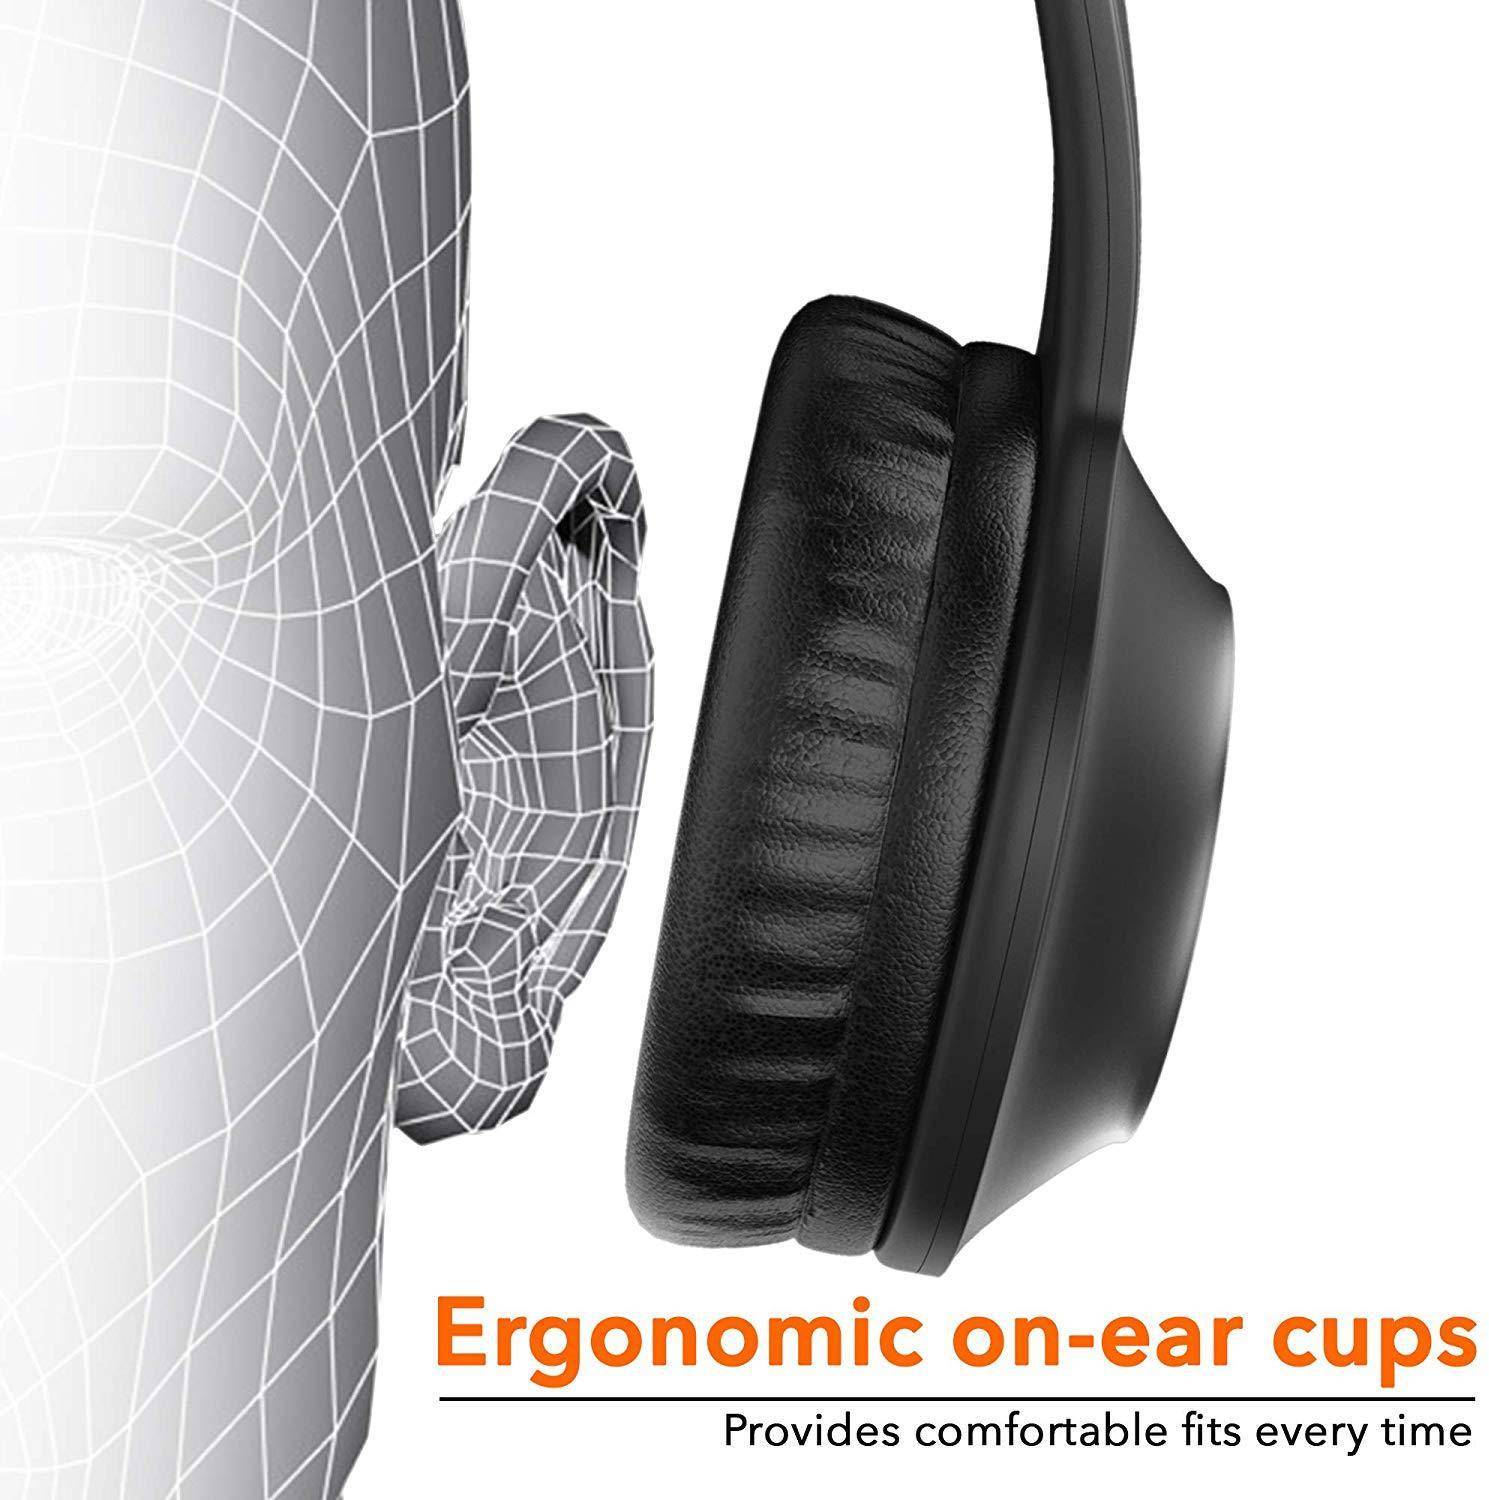 On-ear design with cushions